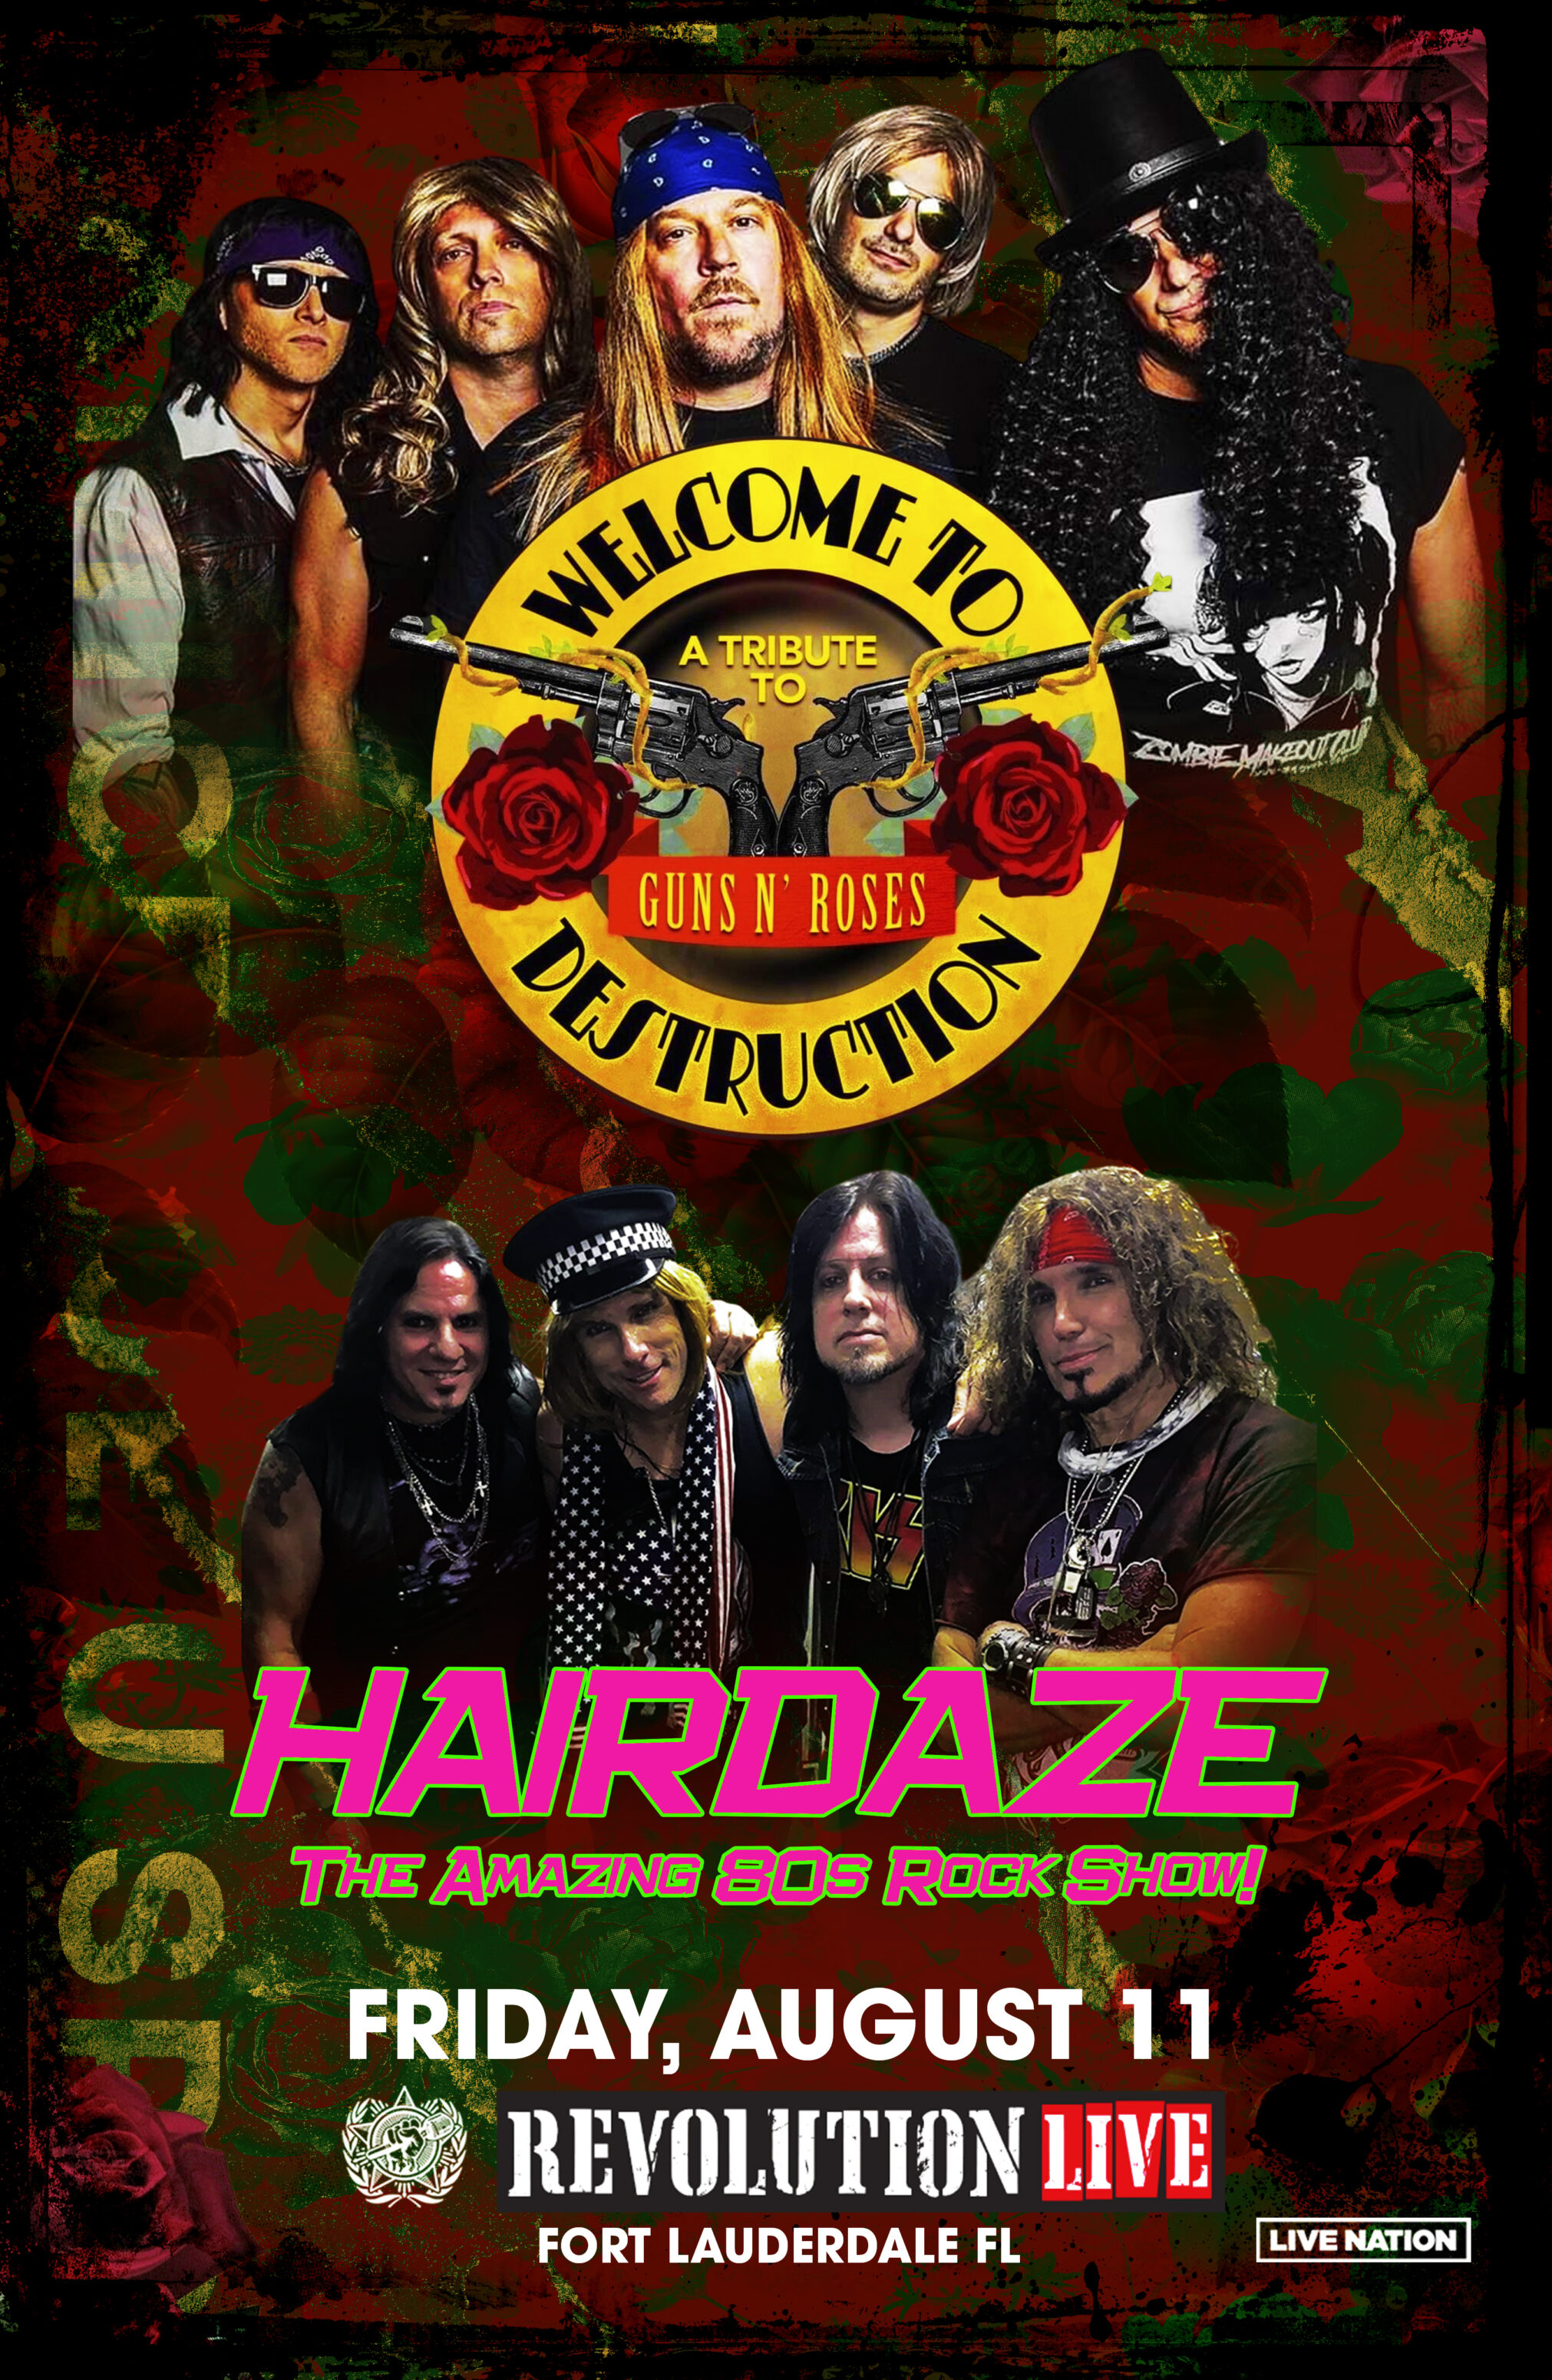 Welcome to Destruction: Tribute to Guns N Roses and Hairdaze